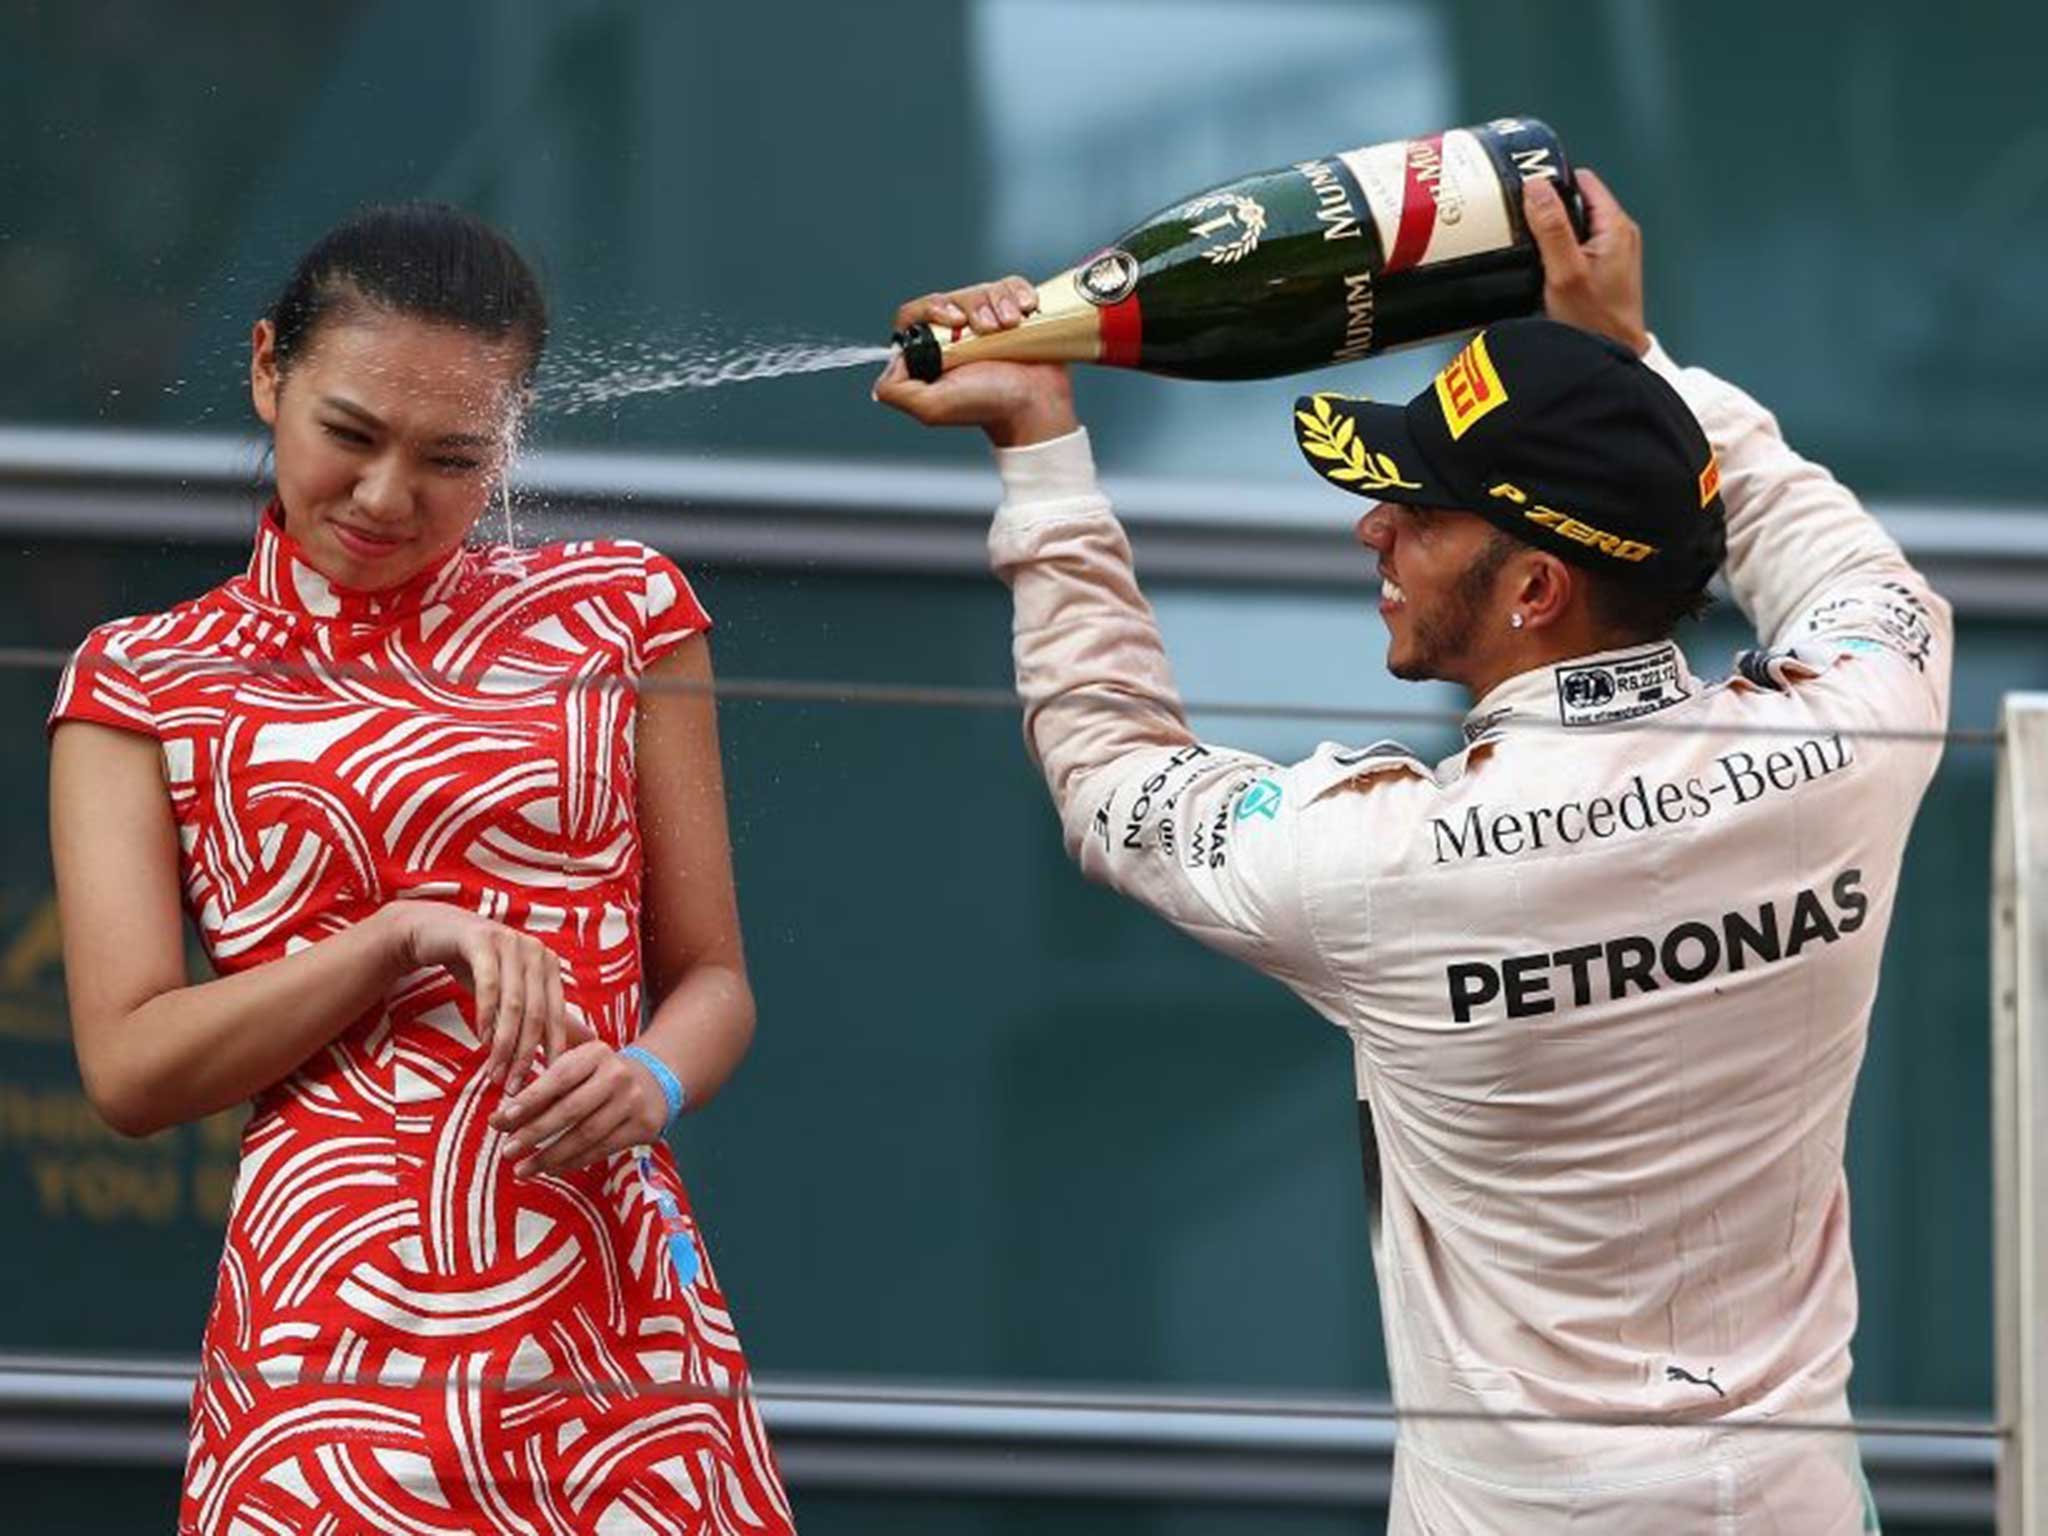 Lewis Hamilton sprays Champagne over Liu Siying after winning in China